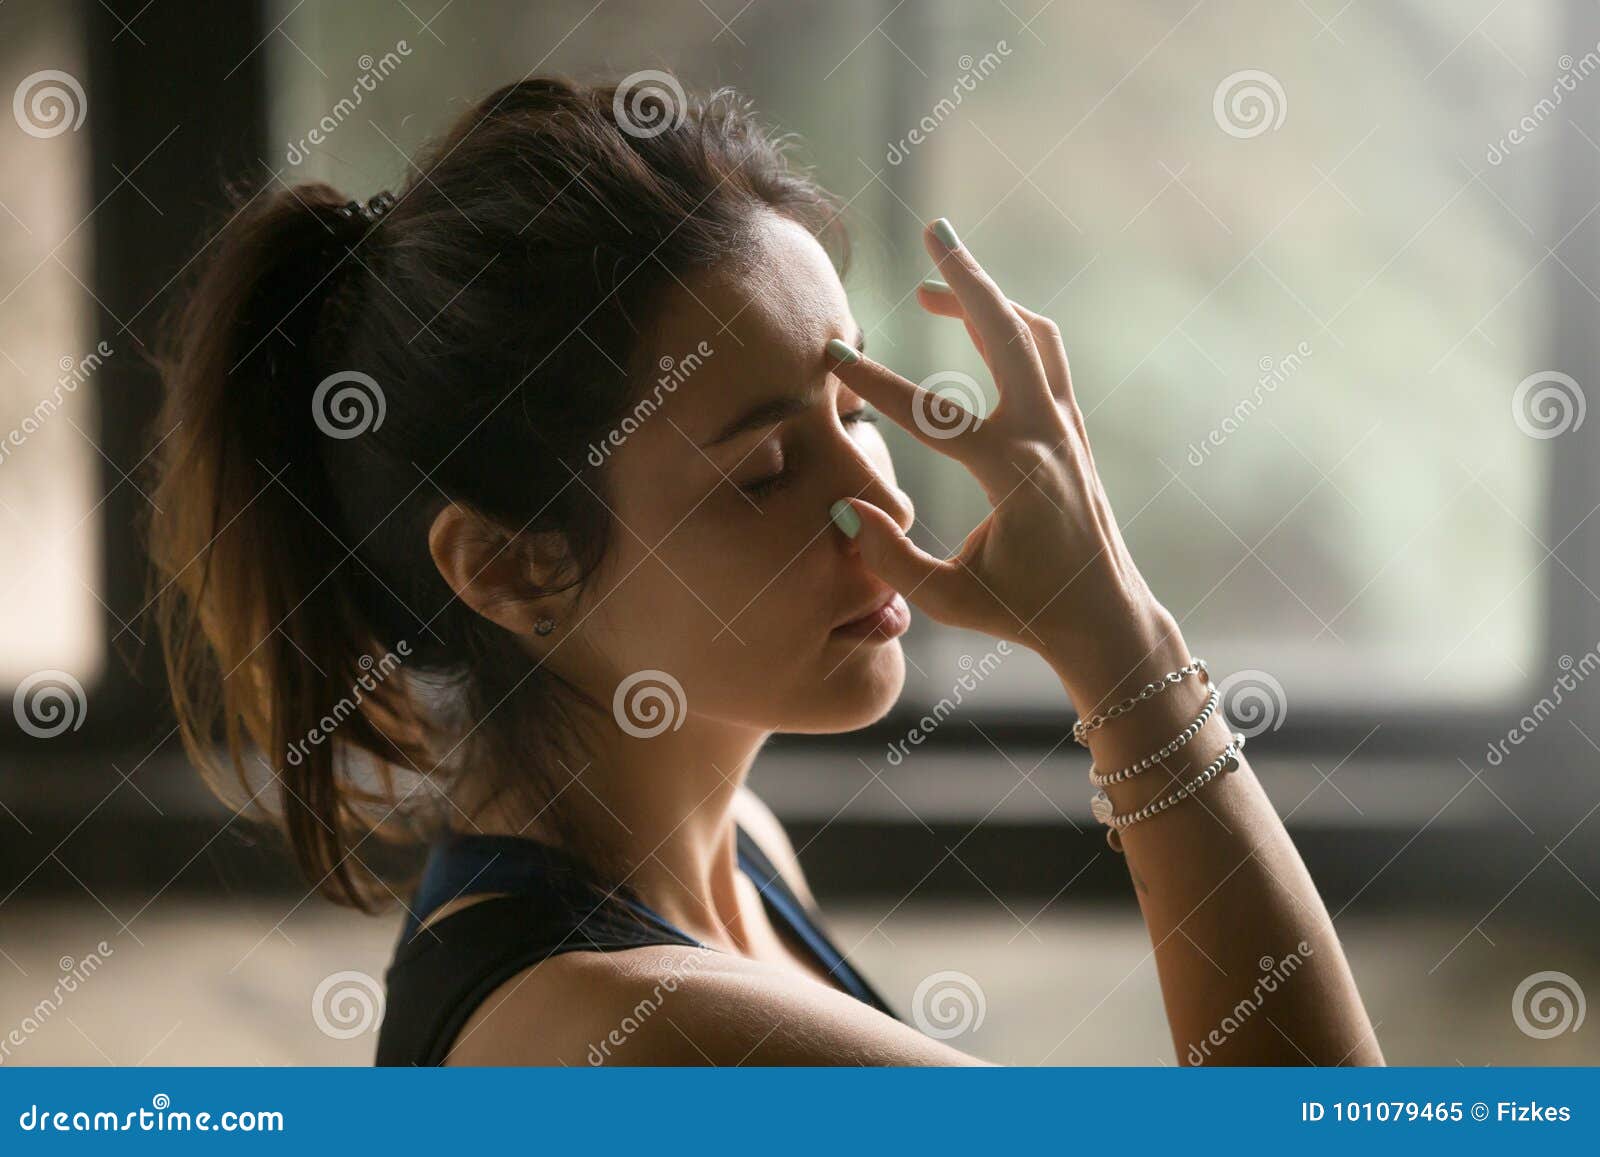 young attractive woman in alternate nostril breathing, studio ba